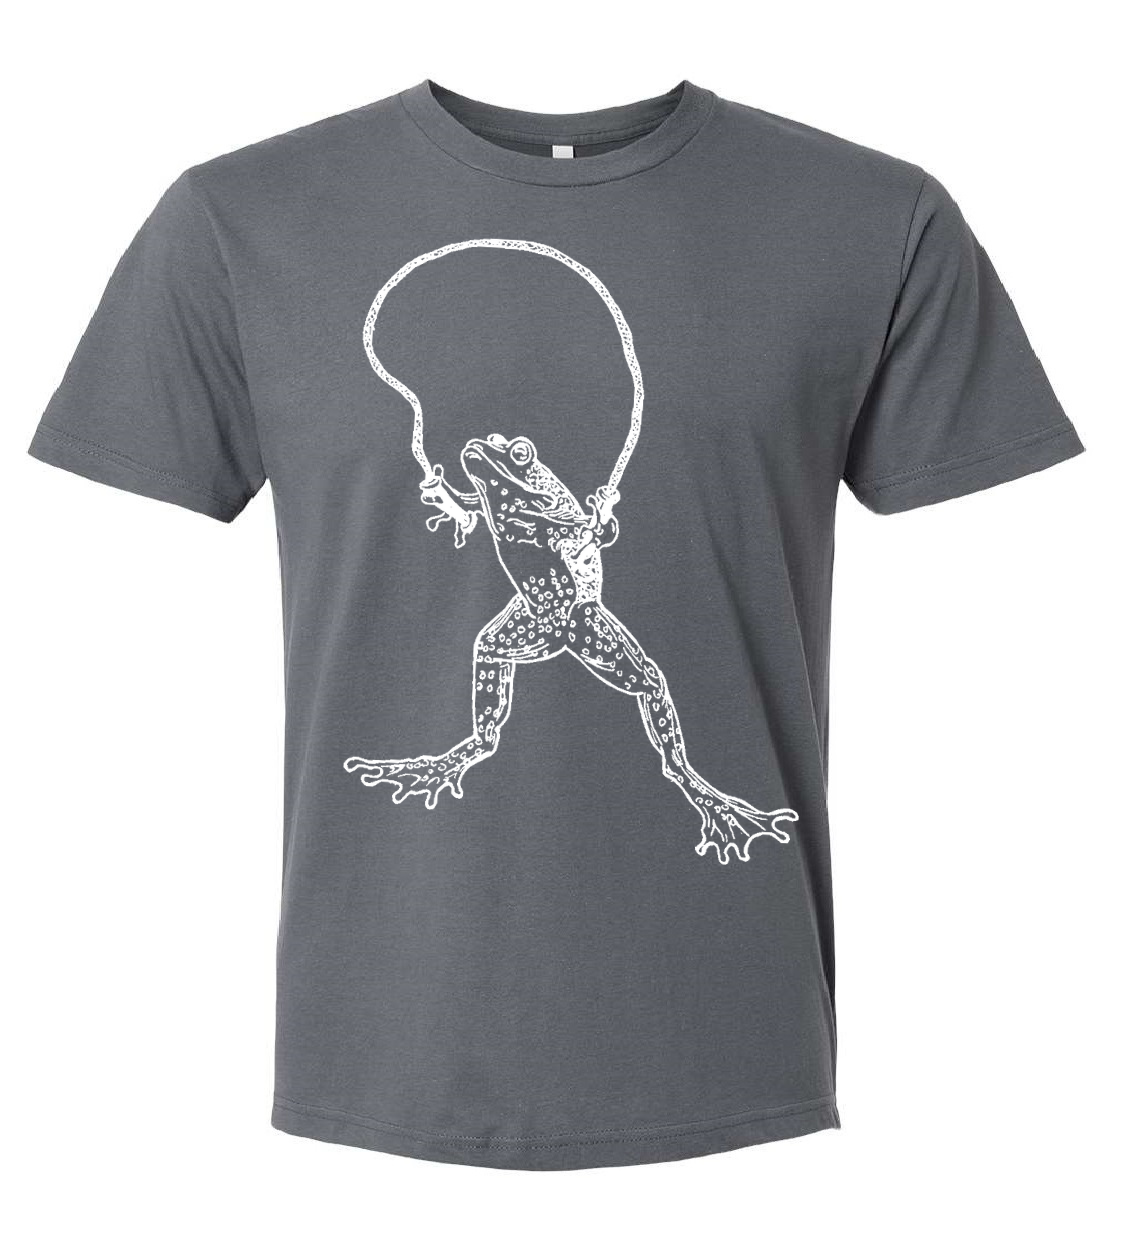 Leaping Frog Unisex T Shirt